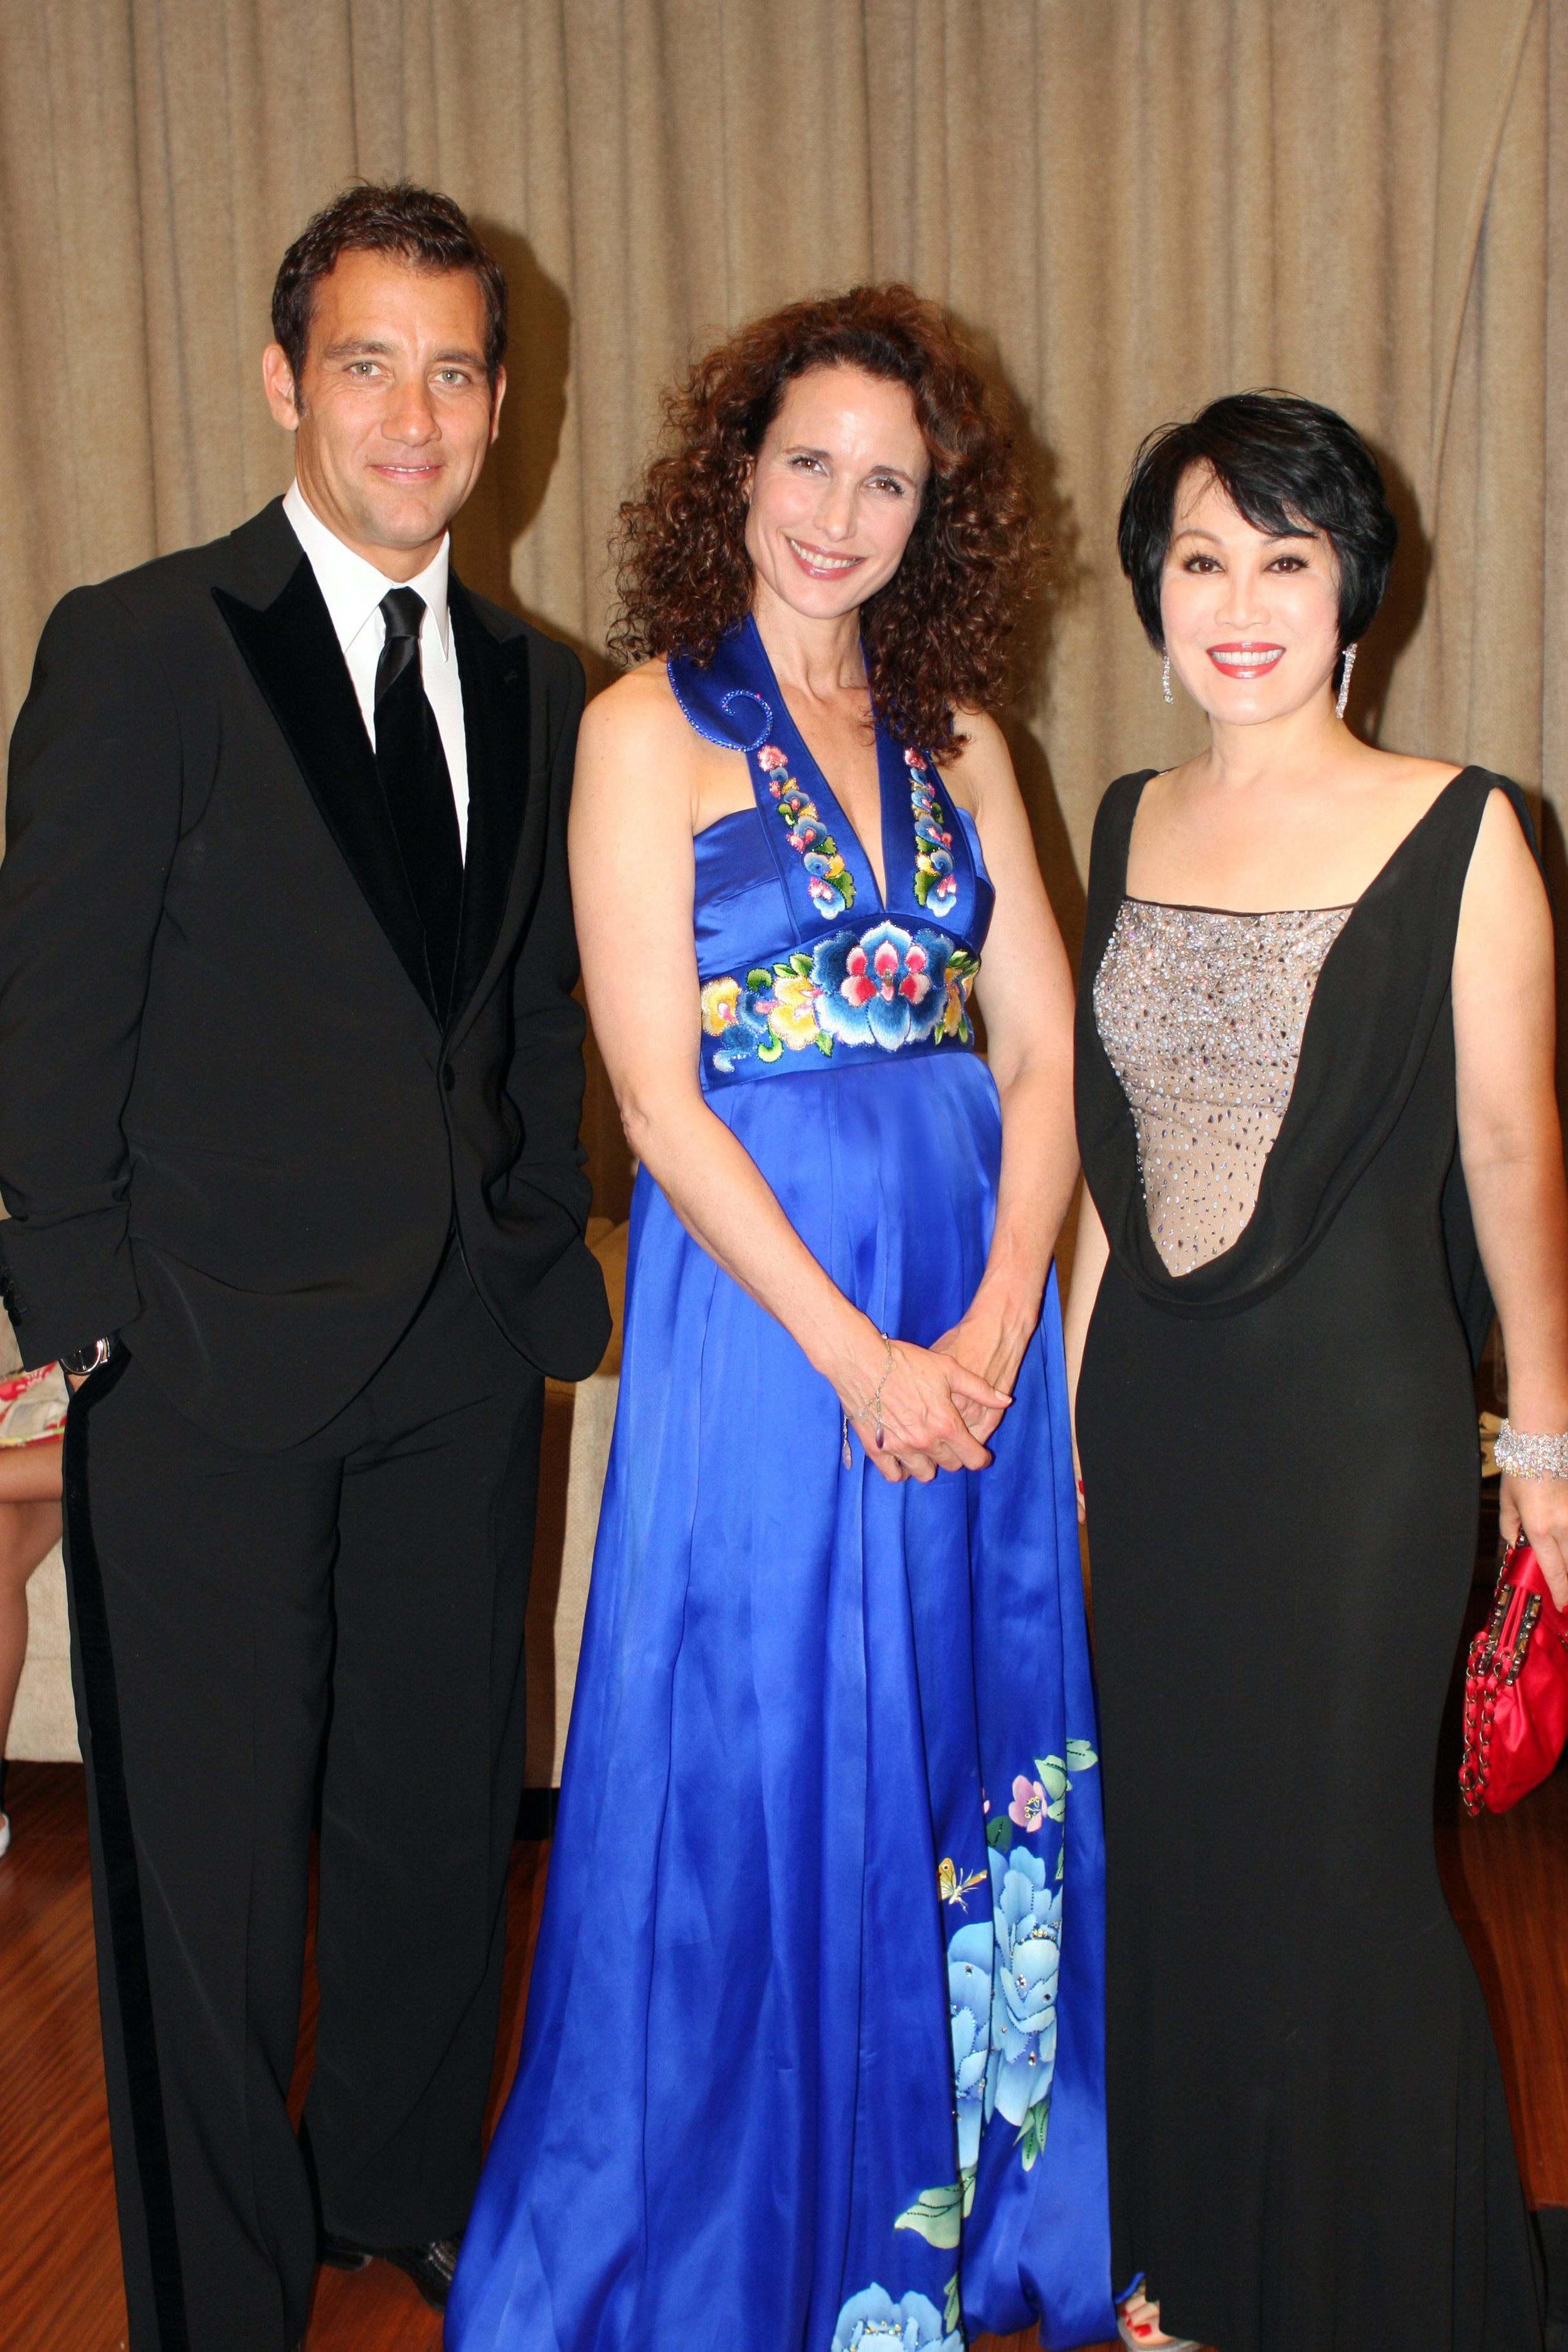  Kan with Clive Owen and Andie MacDowell   Photo courtesy Yue-Sai Kan  